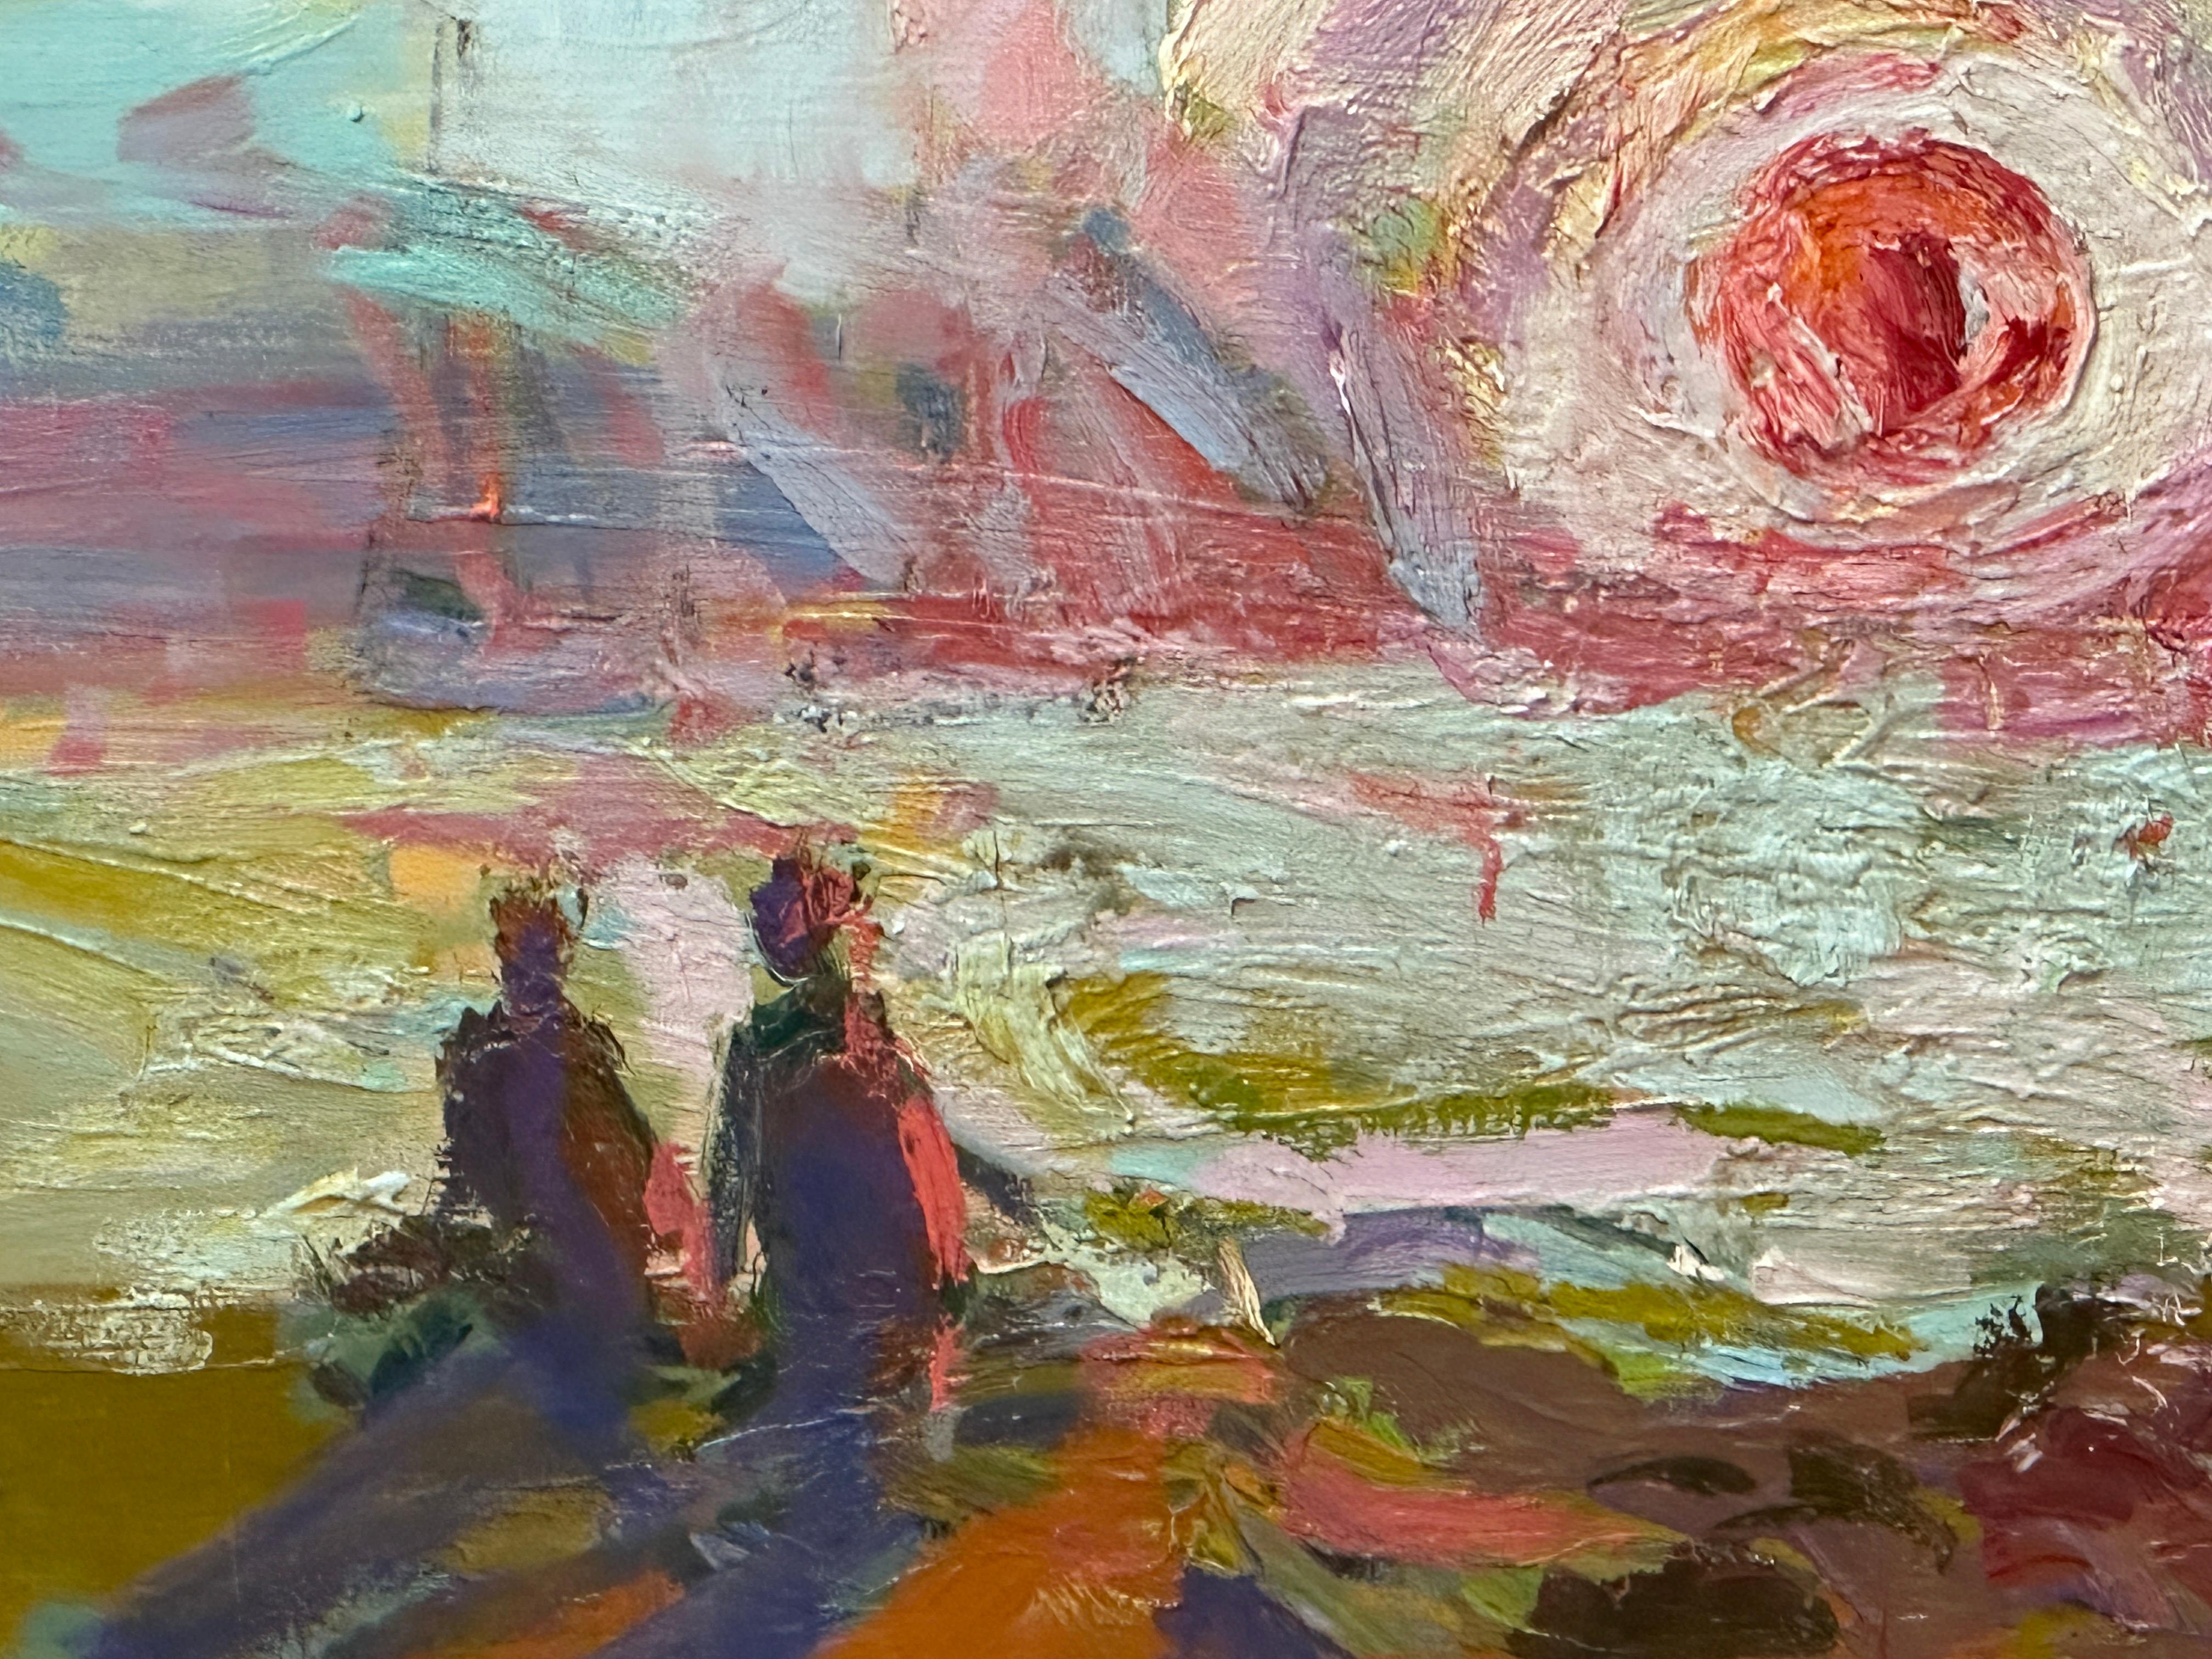 In this stunning figurative work, Constantine the artist, captures the essence of a beach scene at sunset. Using bold strokes and vivid colors creates a sense of urgency and immediacy, as if the viewer is witnessing the sunset in real-time. The